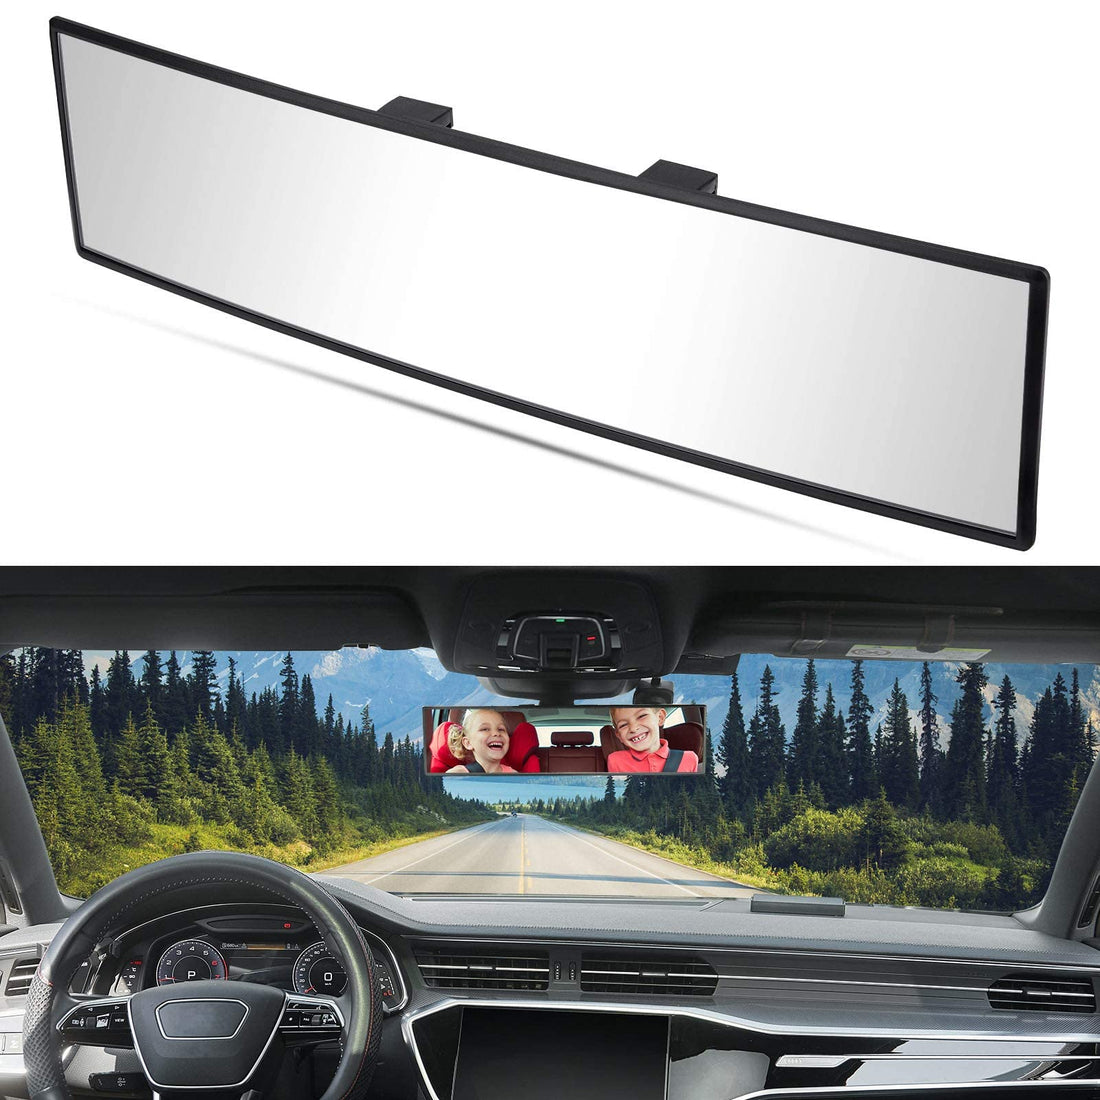 Rear View Mirror, Universal 11.81 Inch Panoramic Convex Interior Clip-on Wide Angle Mirror-Clear